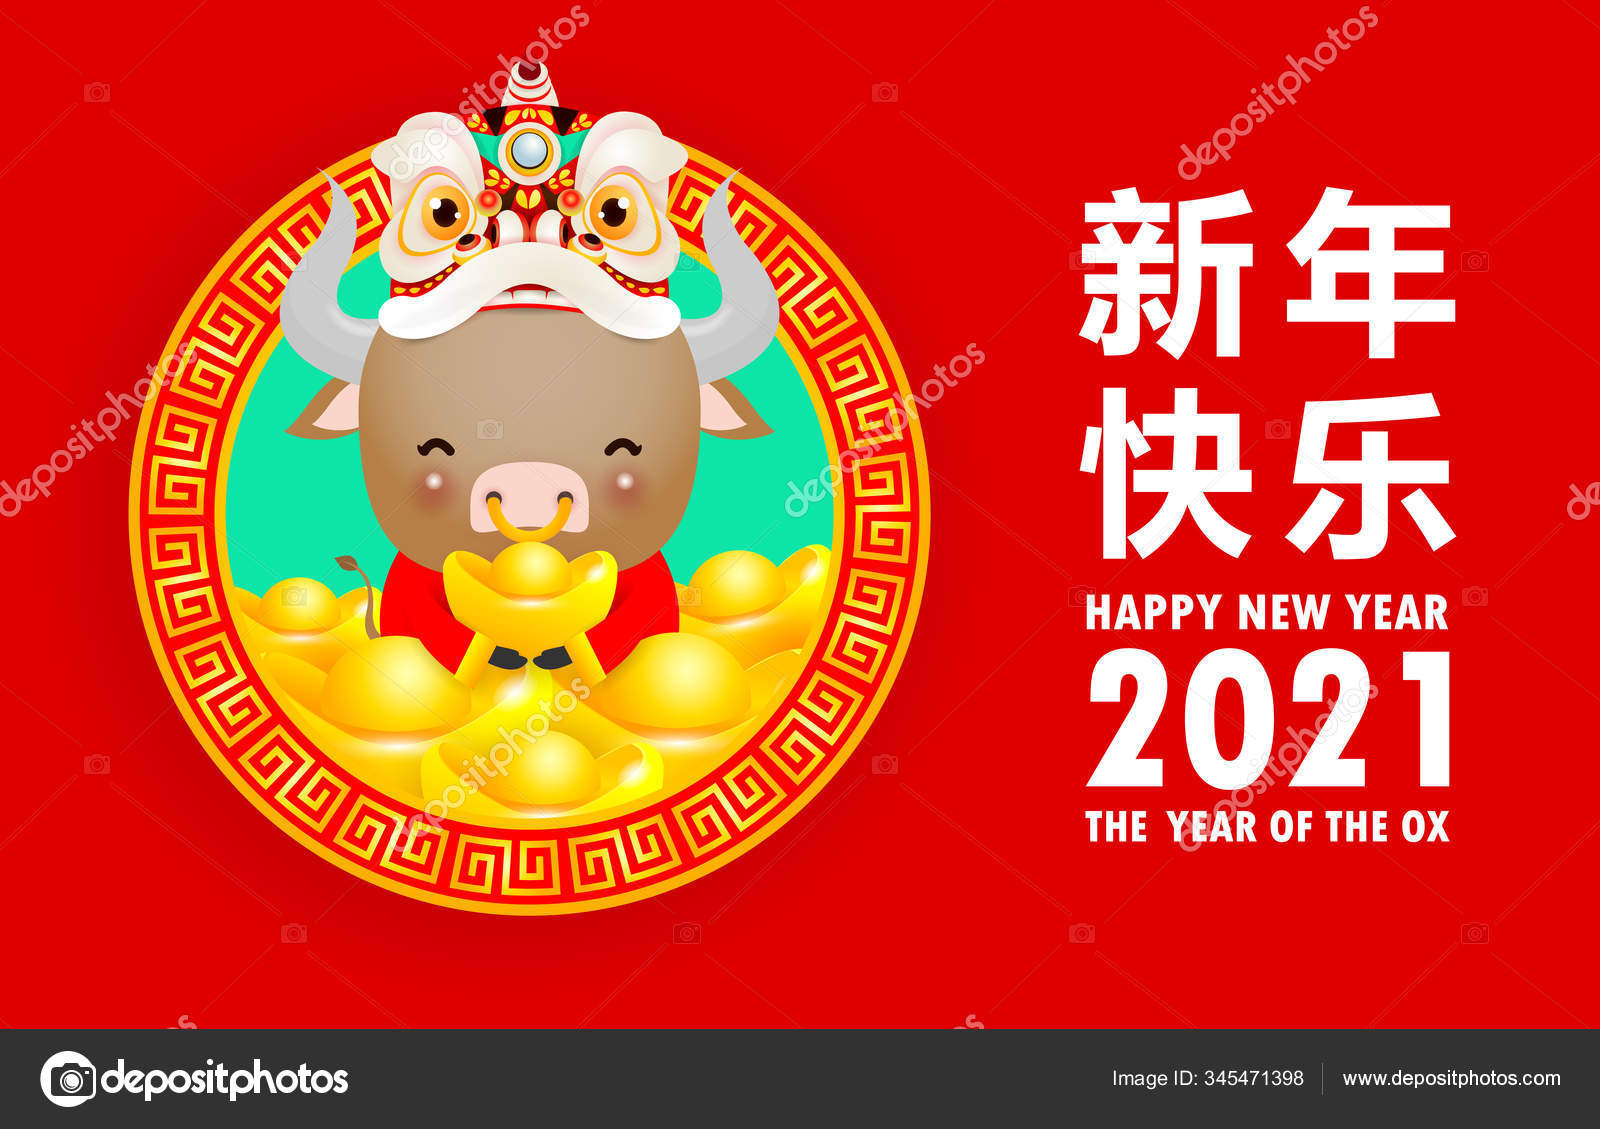 Happy Chinese New Year 2021 Greeting Card Cute Little Cow Vector Image By C Phanuchat10700 Gmail Com Vector Stock 345471398